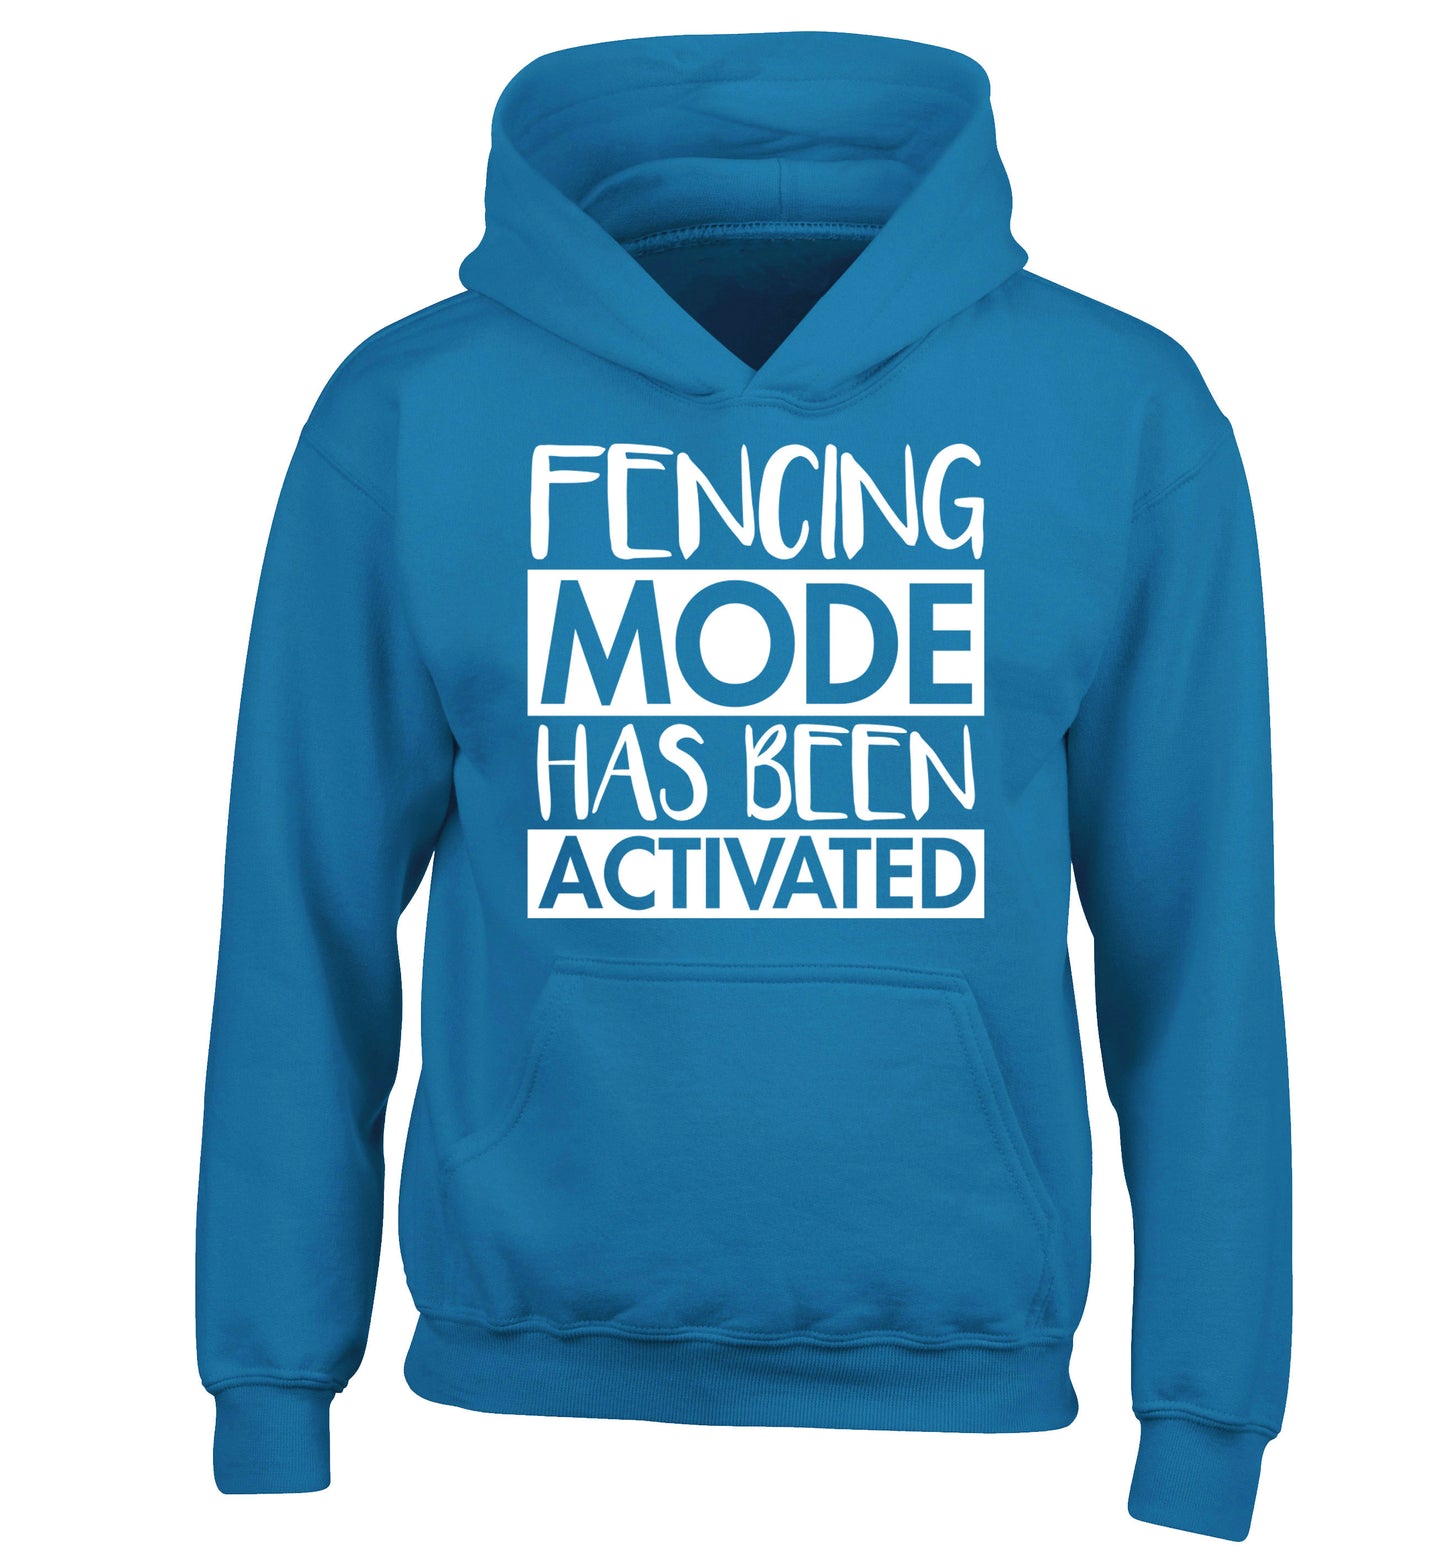 Fencing mode activated children's blue hoodie 12-14 Years